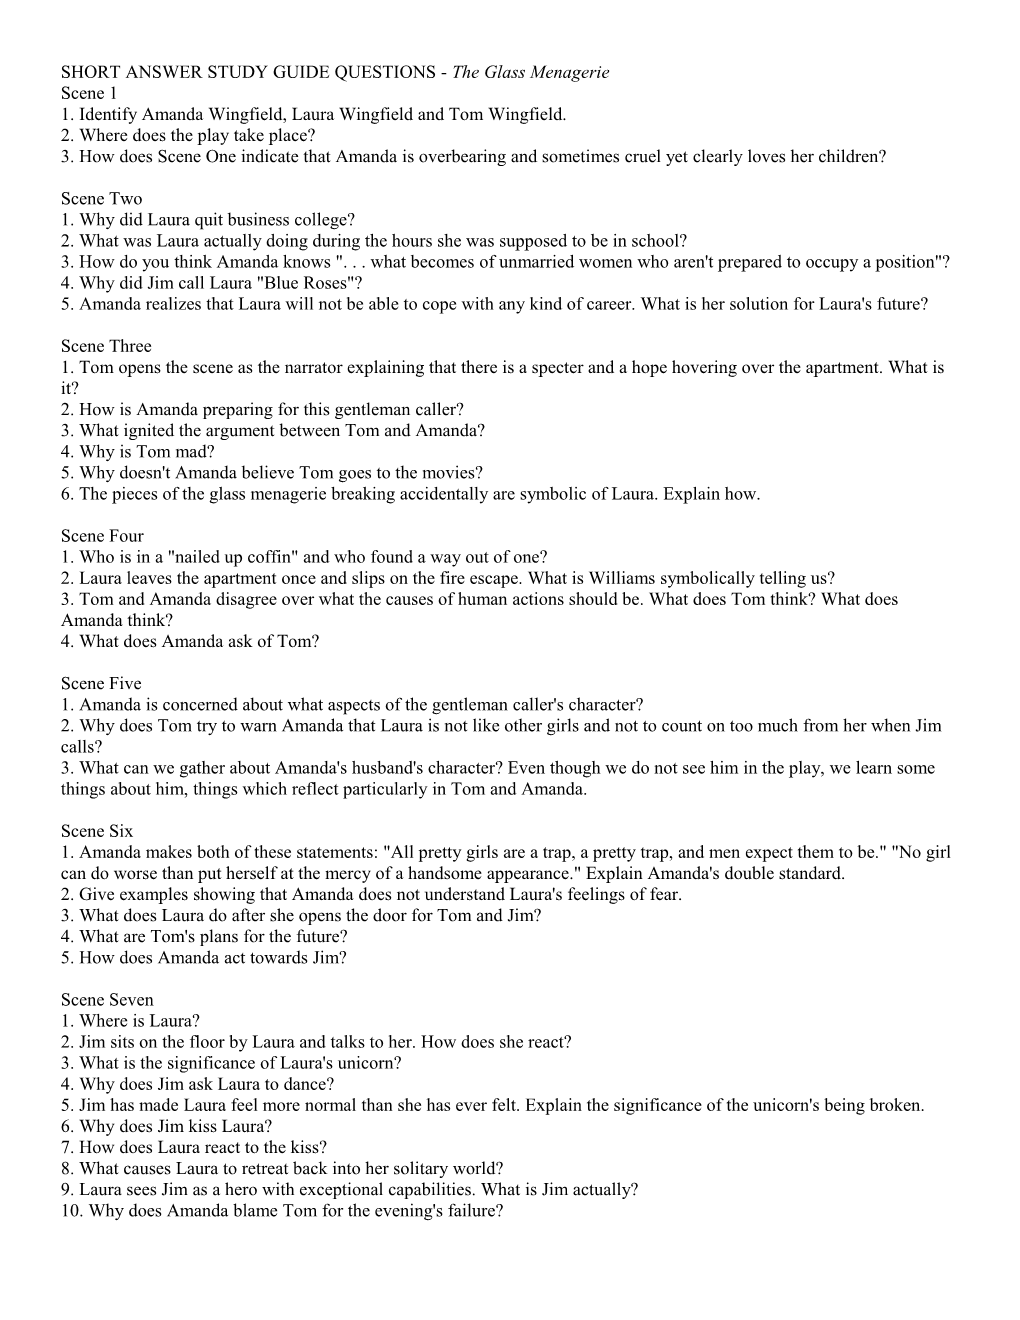 SHORT ANSWER STUDY GUIDE QUESTIONS - the Glass Menagerie